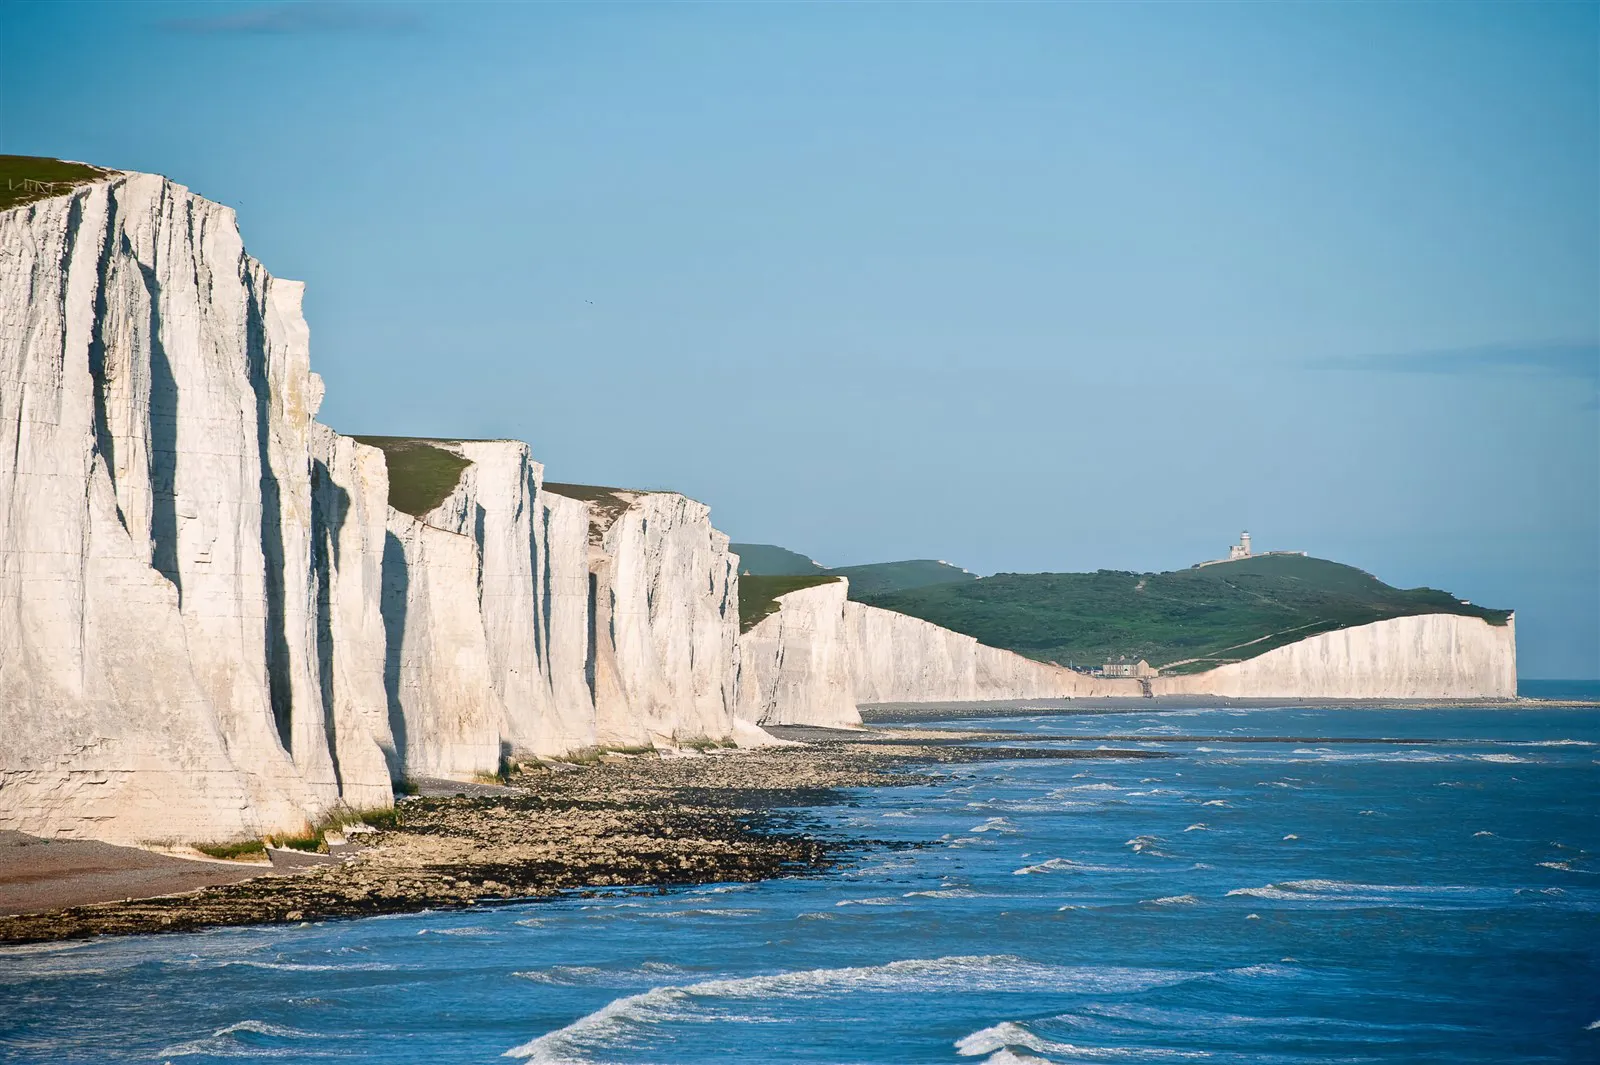 Seven Sisters in East Sussex